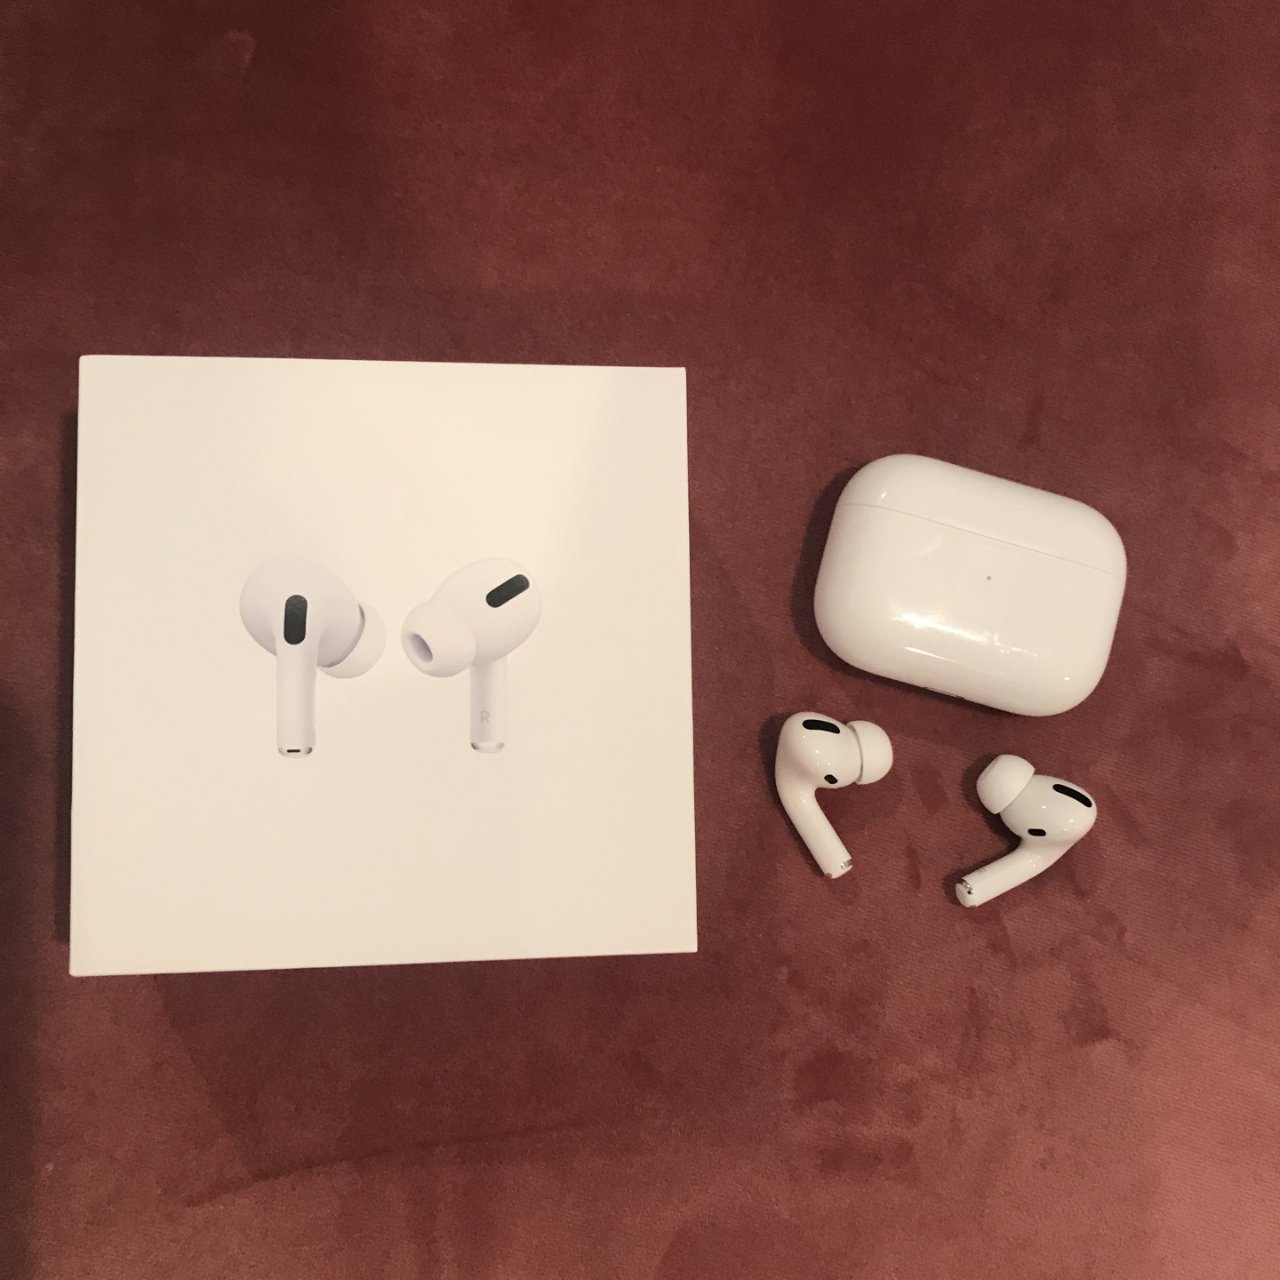 Apple AirPods Pro : Target